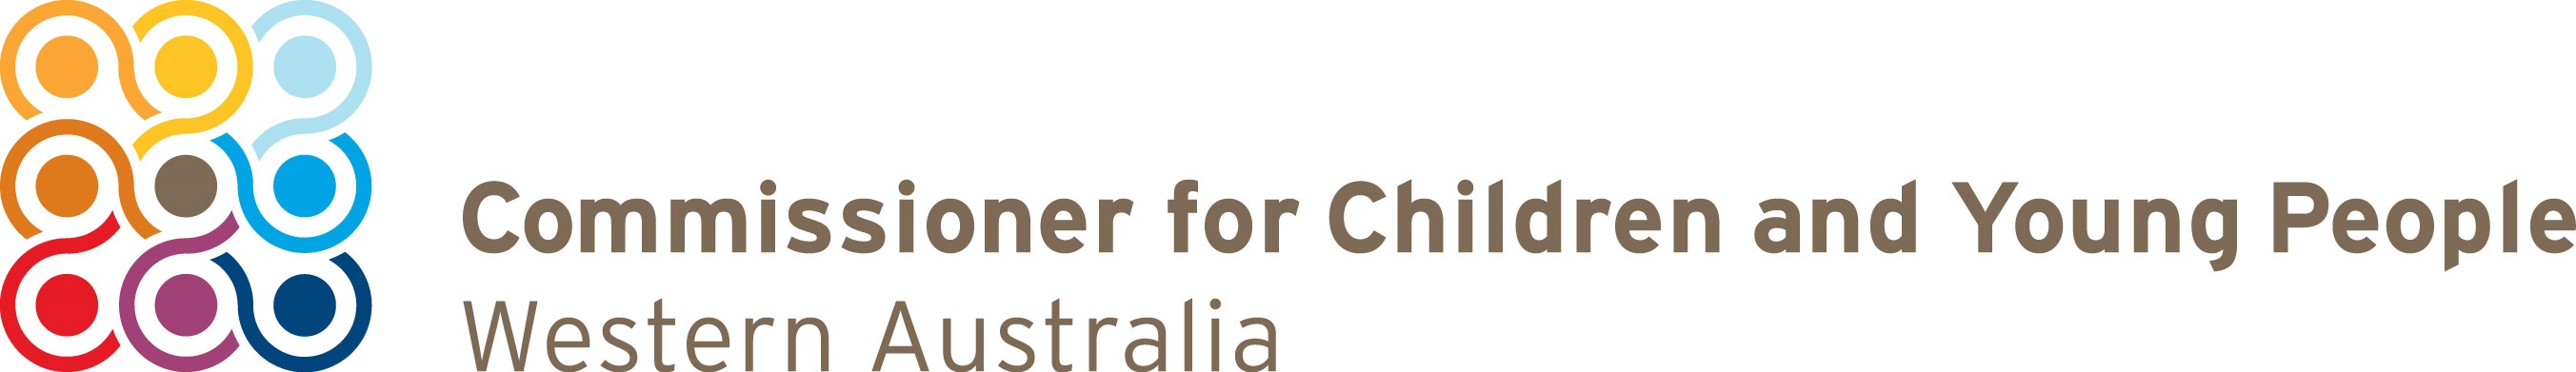 Commissioner for Children and Young People of WA logo.